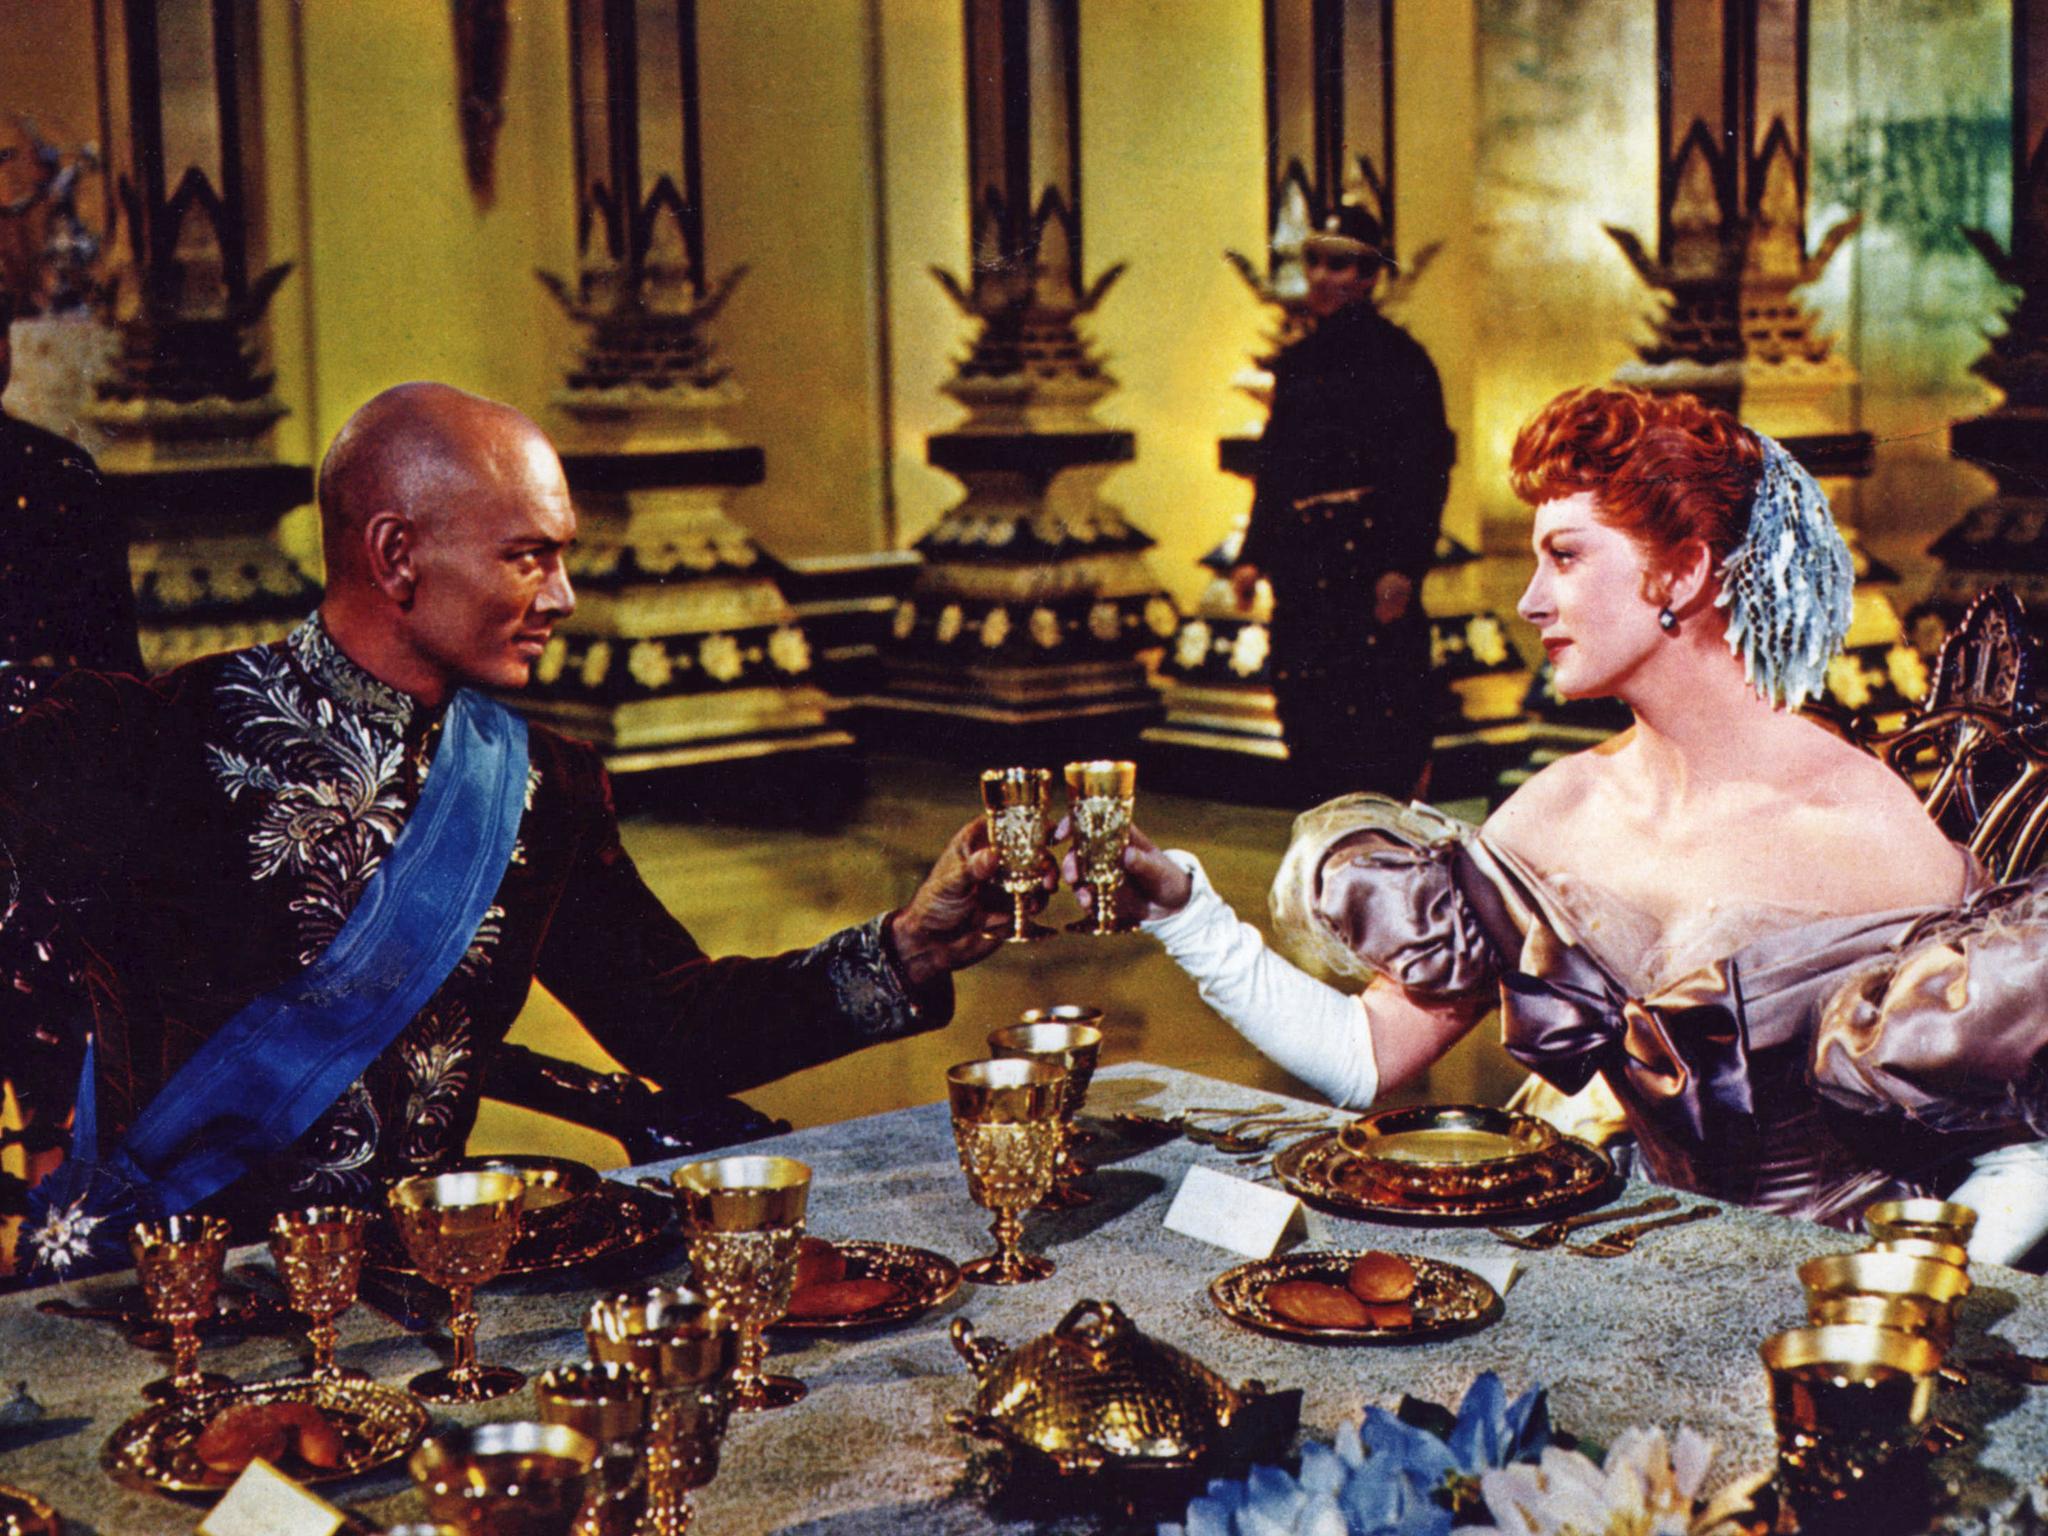 Yul Brynner and Deborah Kerr in ‘The King and I’ (1956)